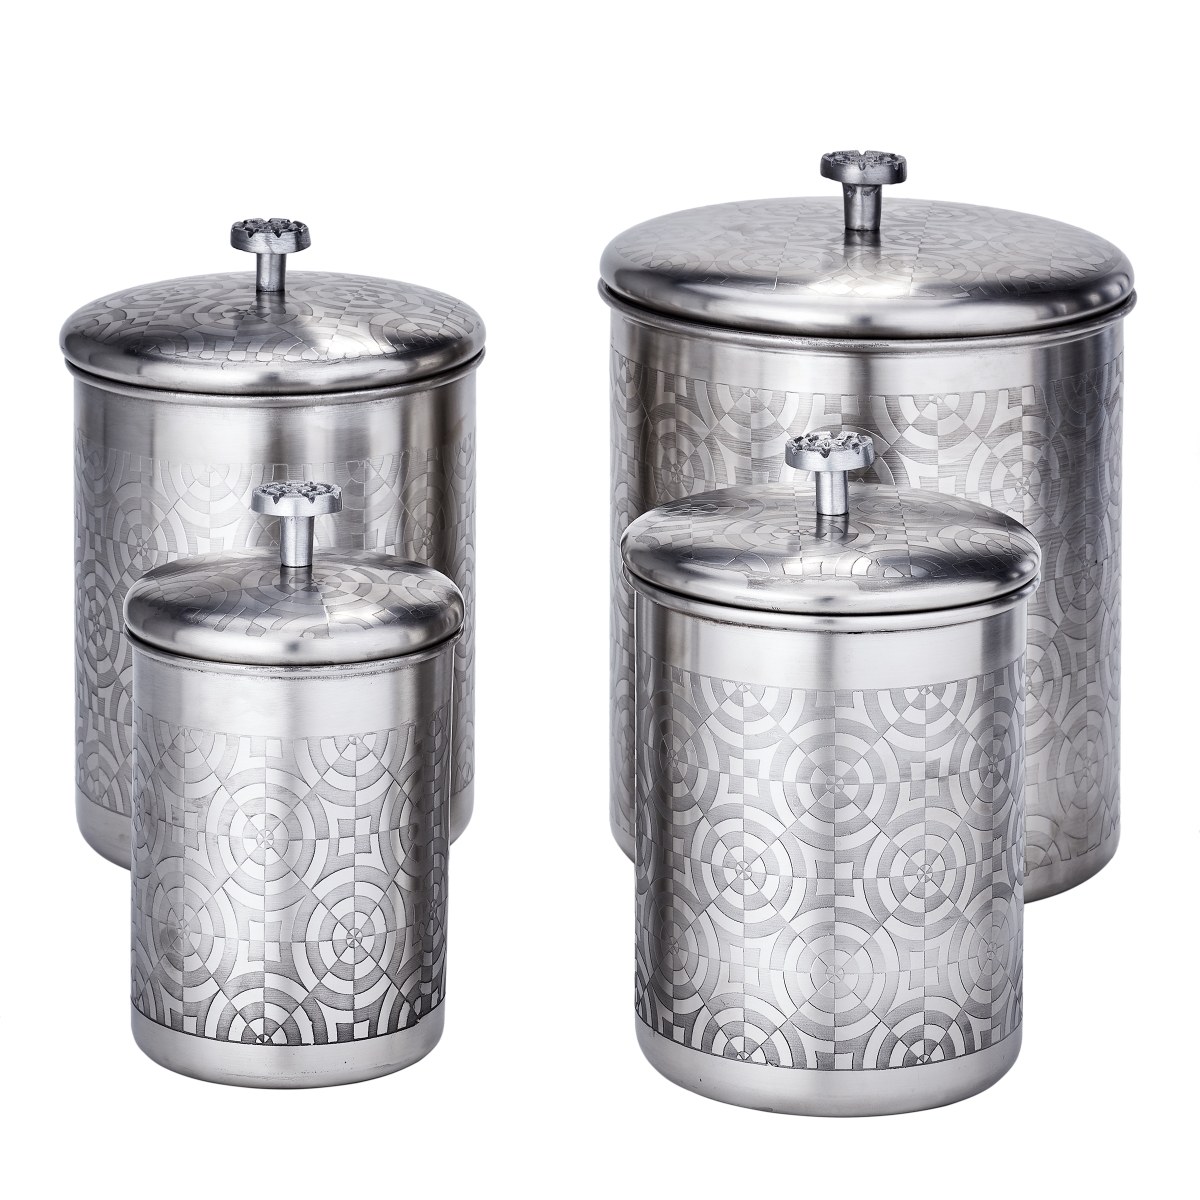 1864sn 1.75-4.75 Qt. Geometric Canister Set, Brushed Nickel - 4 Piece